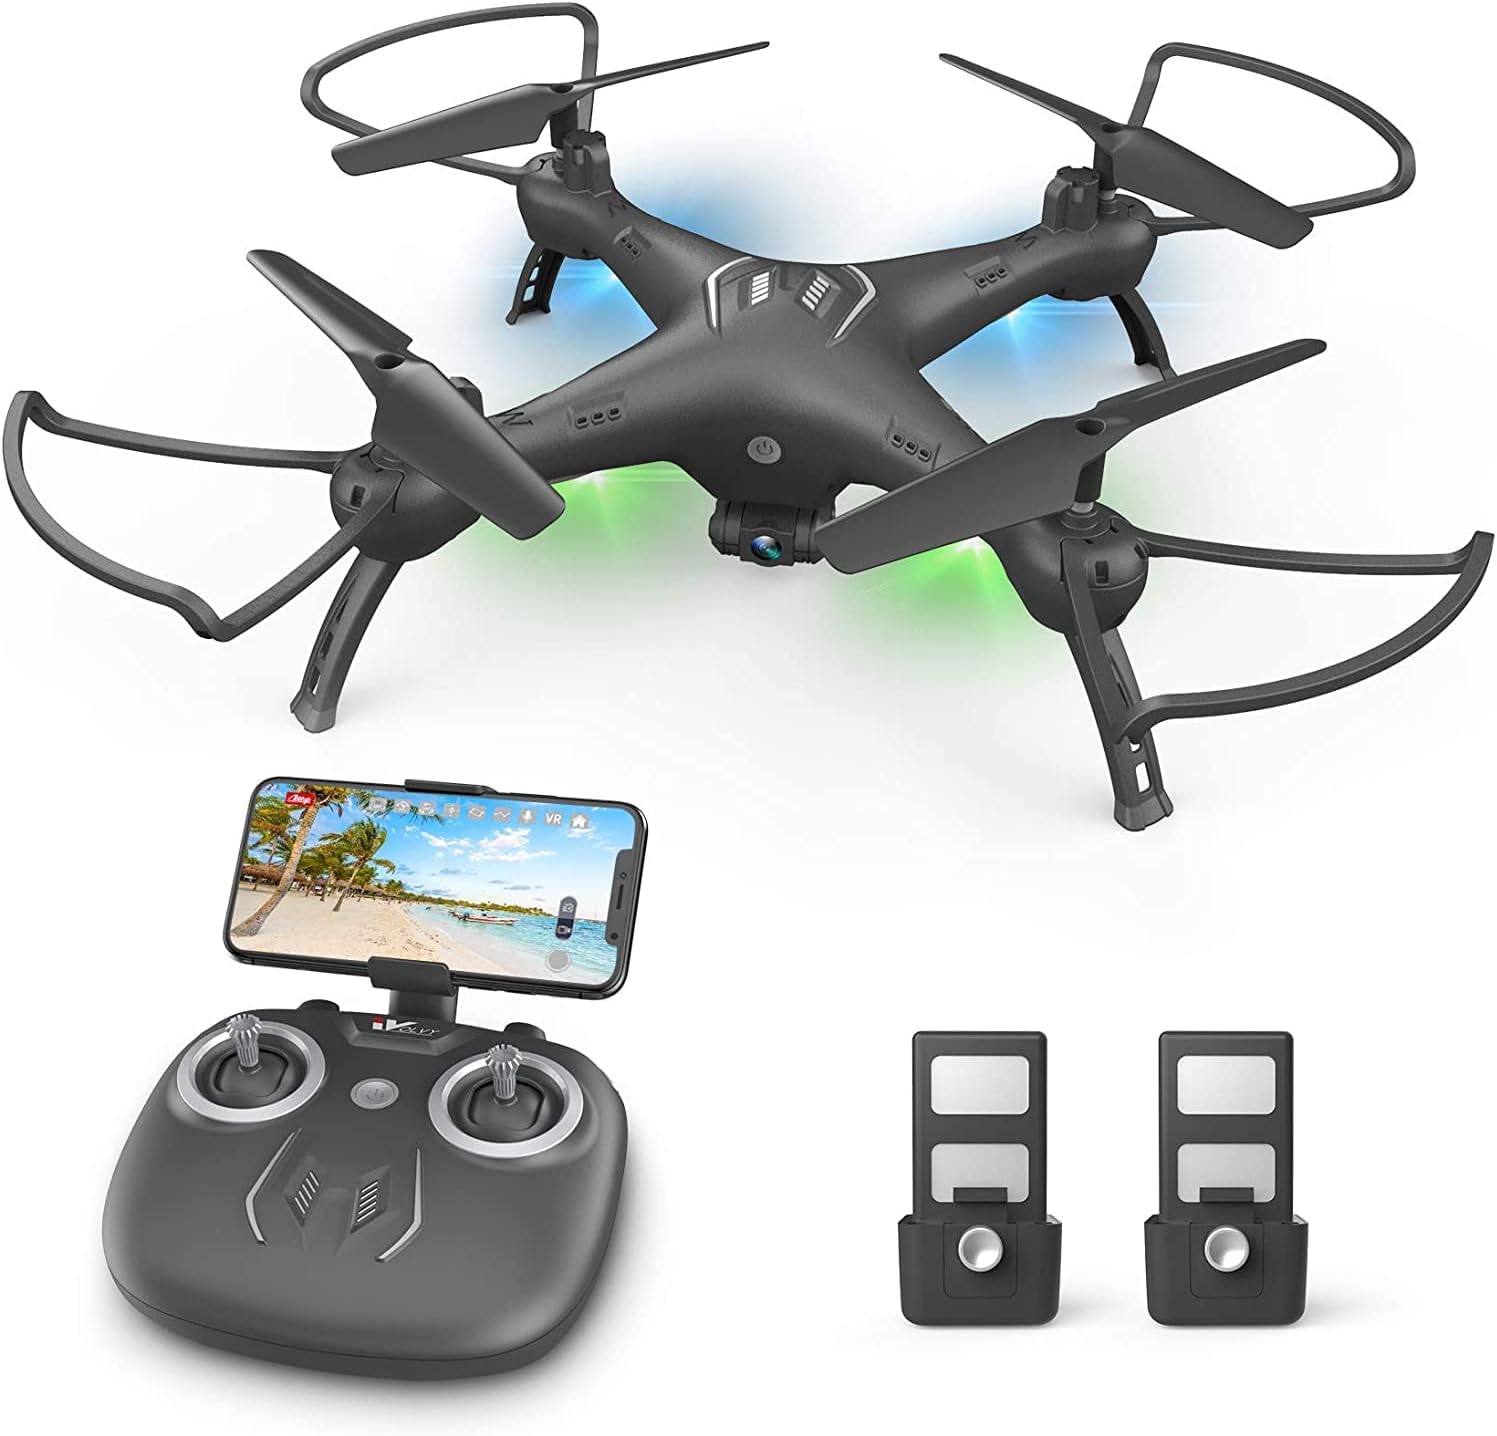 Drone with Camera for Adults, ATTOP 1080P Live Video 120° Wide Angle APP-Controlled Camera Drone for Kids 8-12, Beginner Friendly with 1 Key Fly/Land/Return, Remote/Voice/Gesture/Gravity Control, FPV Drone w/ Safe Emergency Stop, 360° Flip, VR Mode, Carrying Situation, 2 Batteries, Girls/Boys Gifts